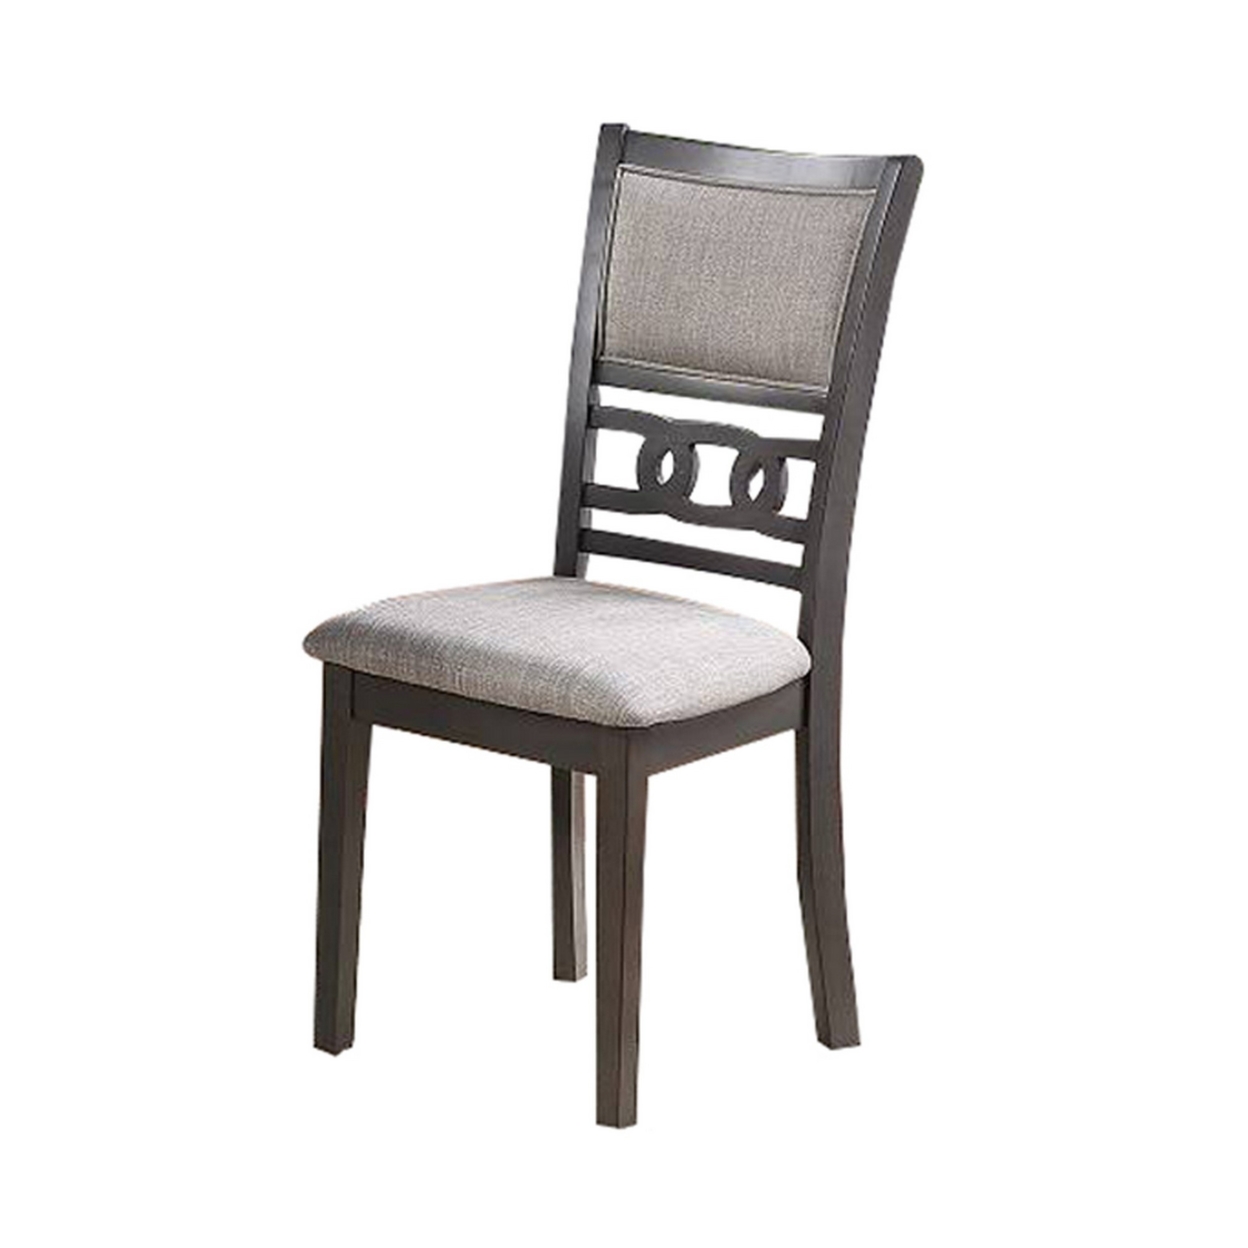 Fabric Upholstered Dining Chair With Panel Back, Knot Cut Outs, Set Of 2, Gray - Saltoro Sherpi